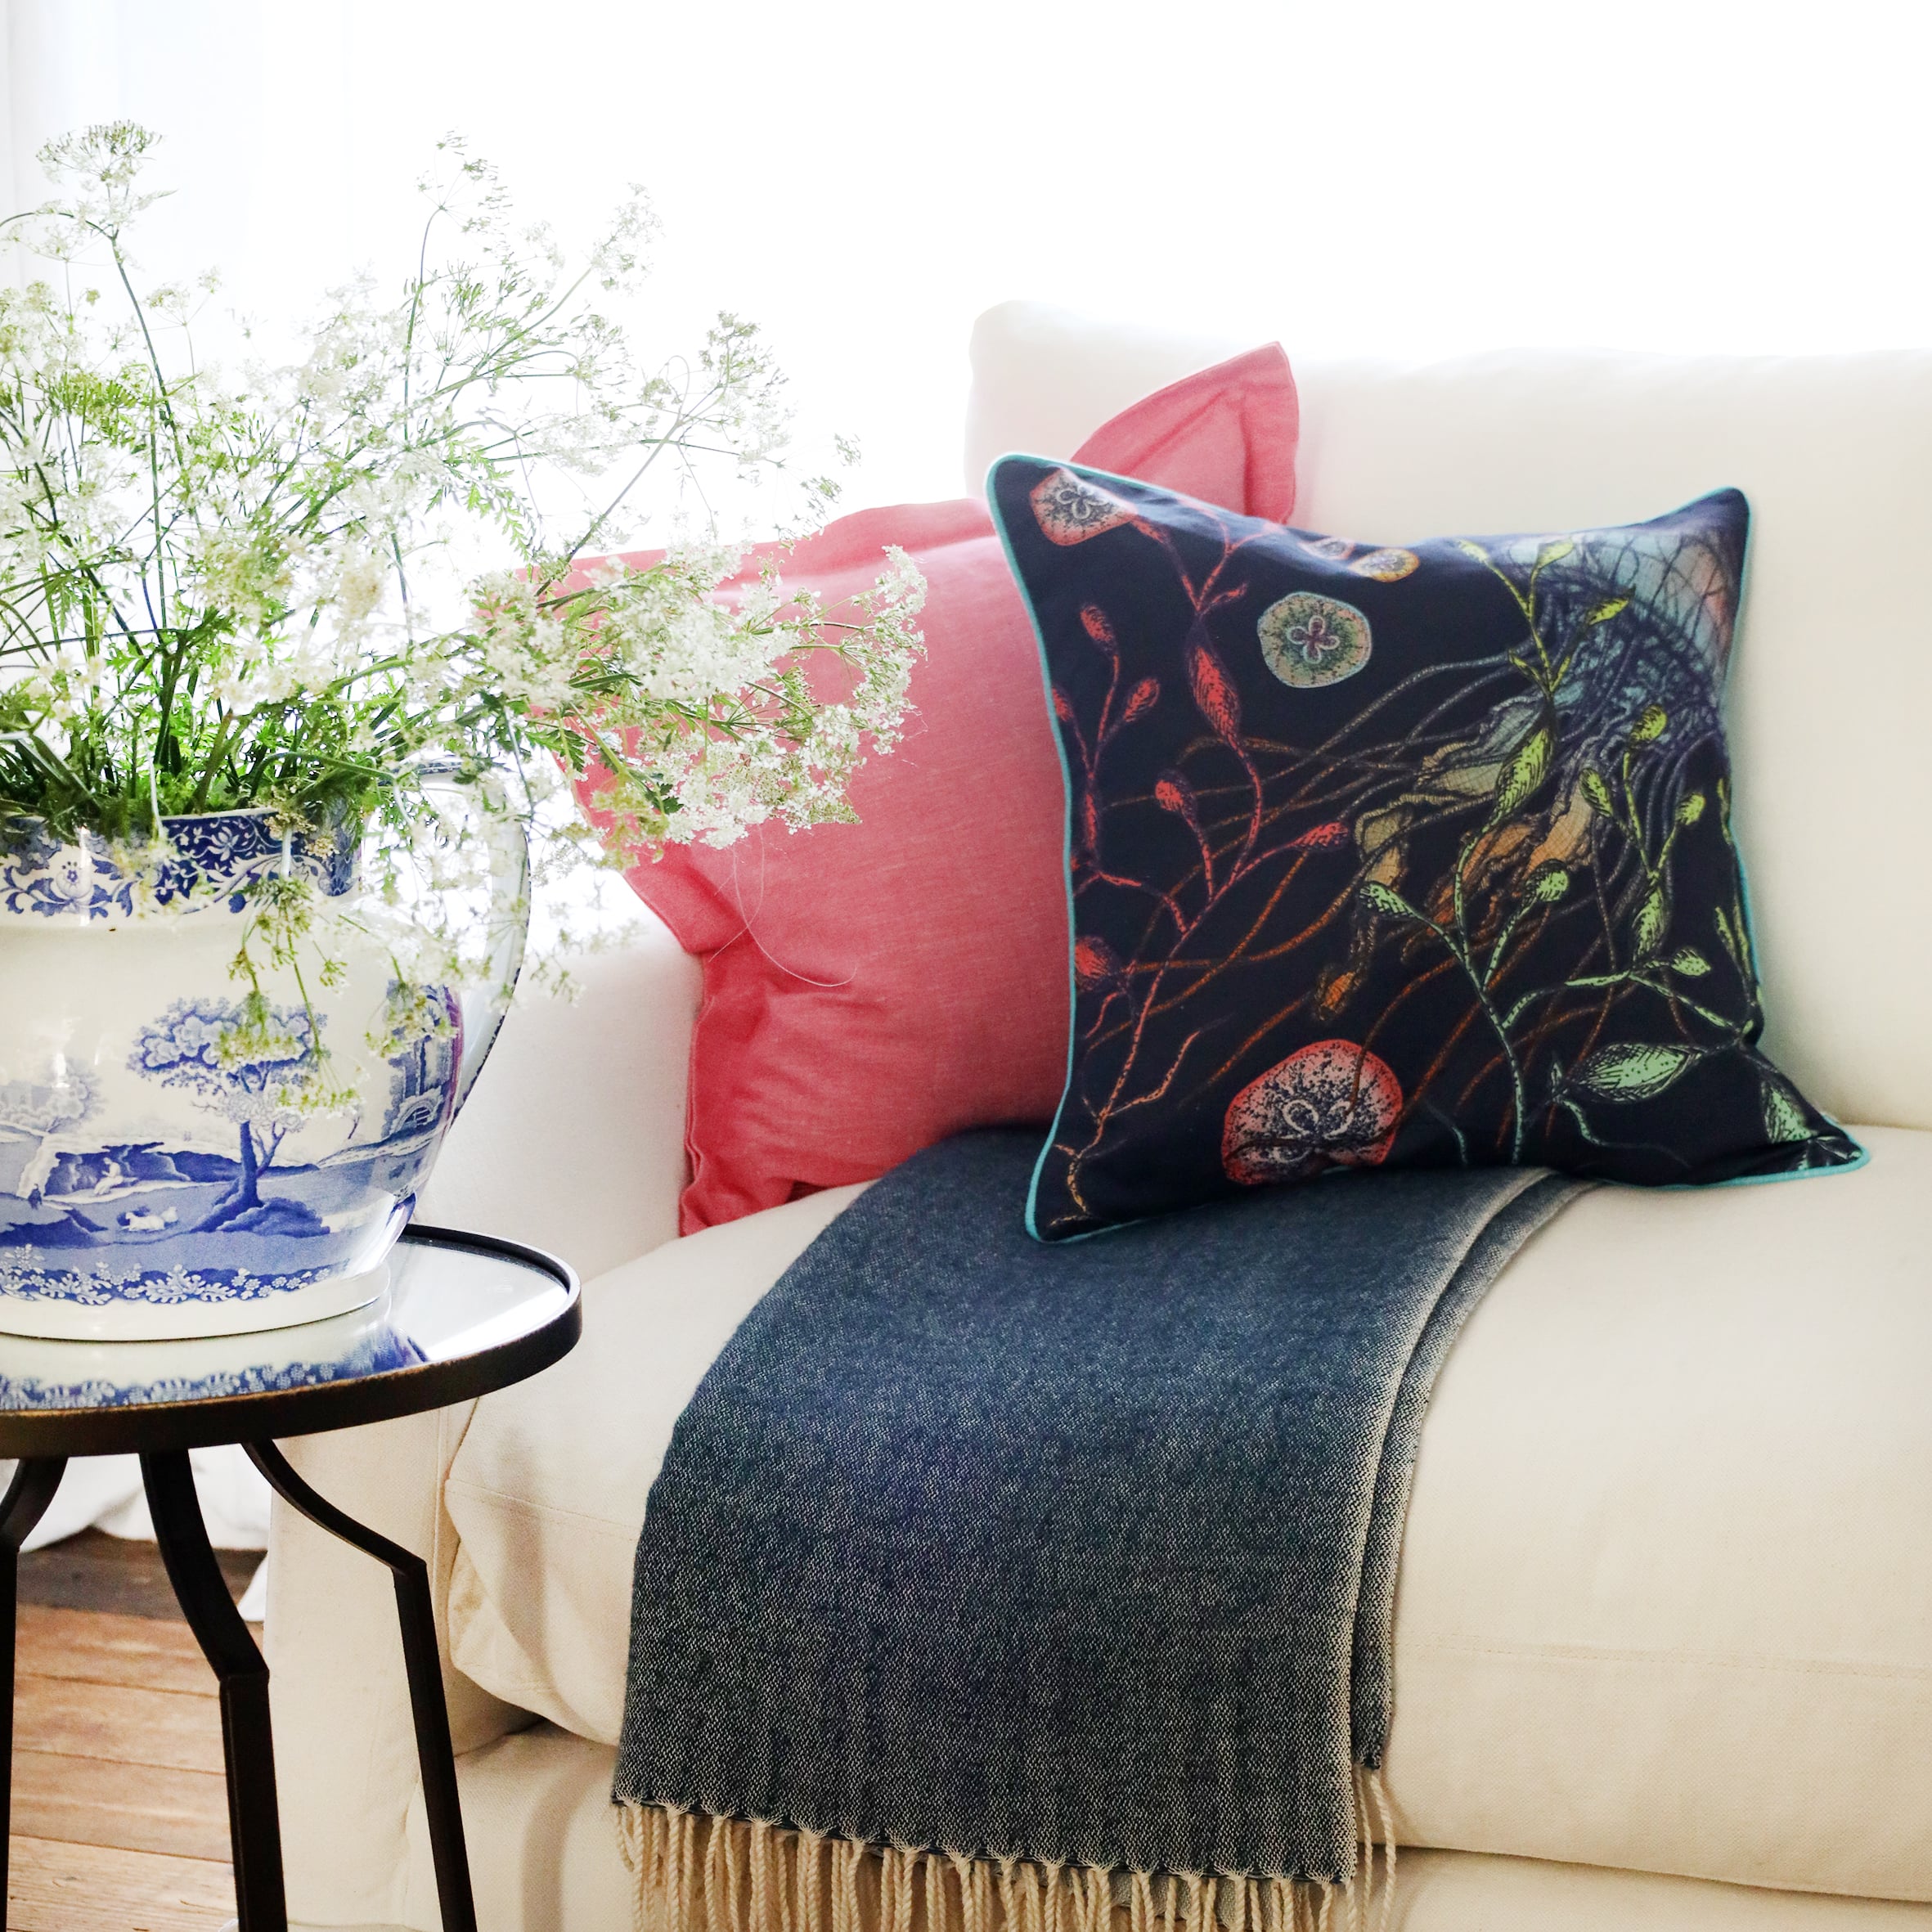 2 cushions an a white sofa with brightly coloured jellyfish illustration on a navy ground, with the sun streaming through the window at the back and a large willow pattern jug filled with cow parsley